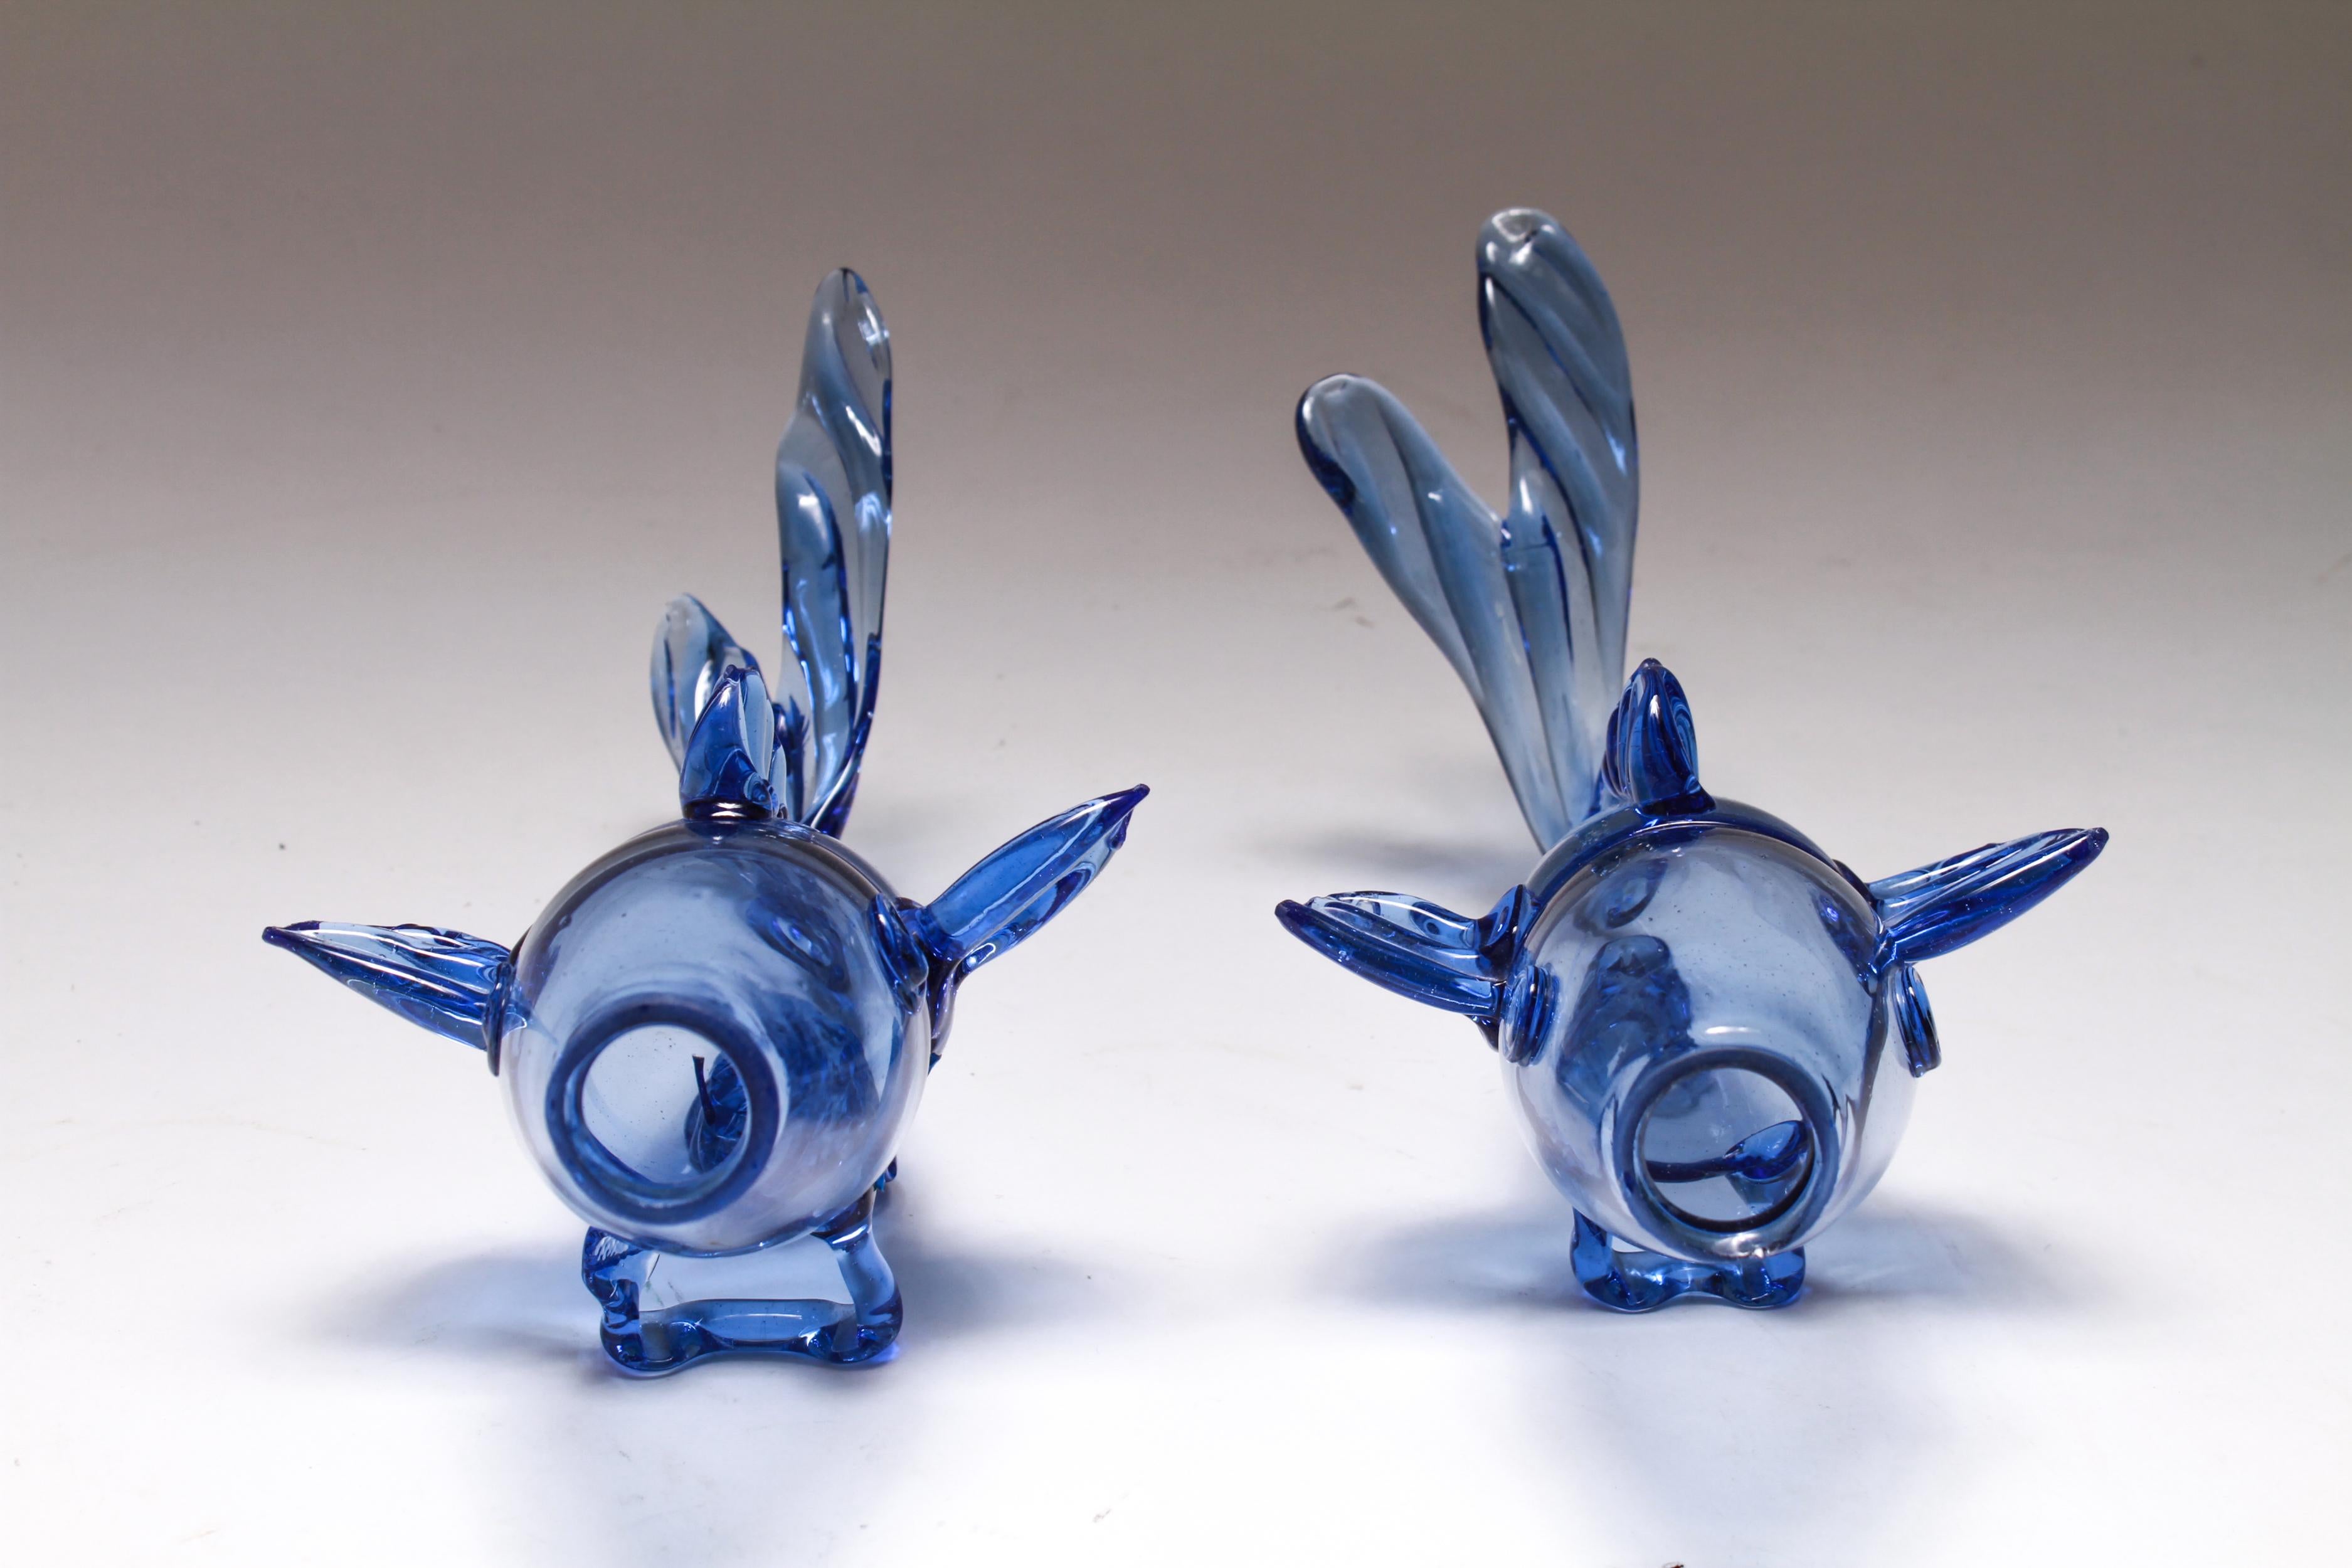 Pair of Murano Venetian hand blown blue glass fish figurines with applied fins, tails, eyes, and braces. The pair is in great vintage condition with a few tiny fleabite chips to fin edges and mouths.